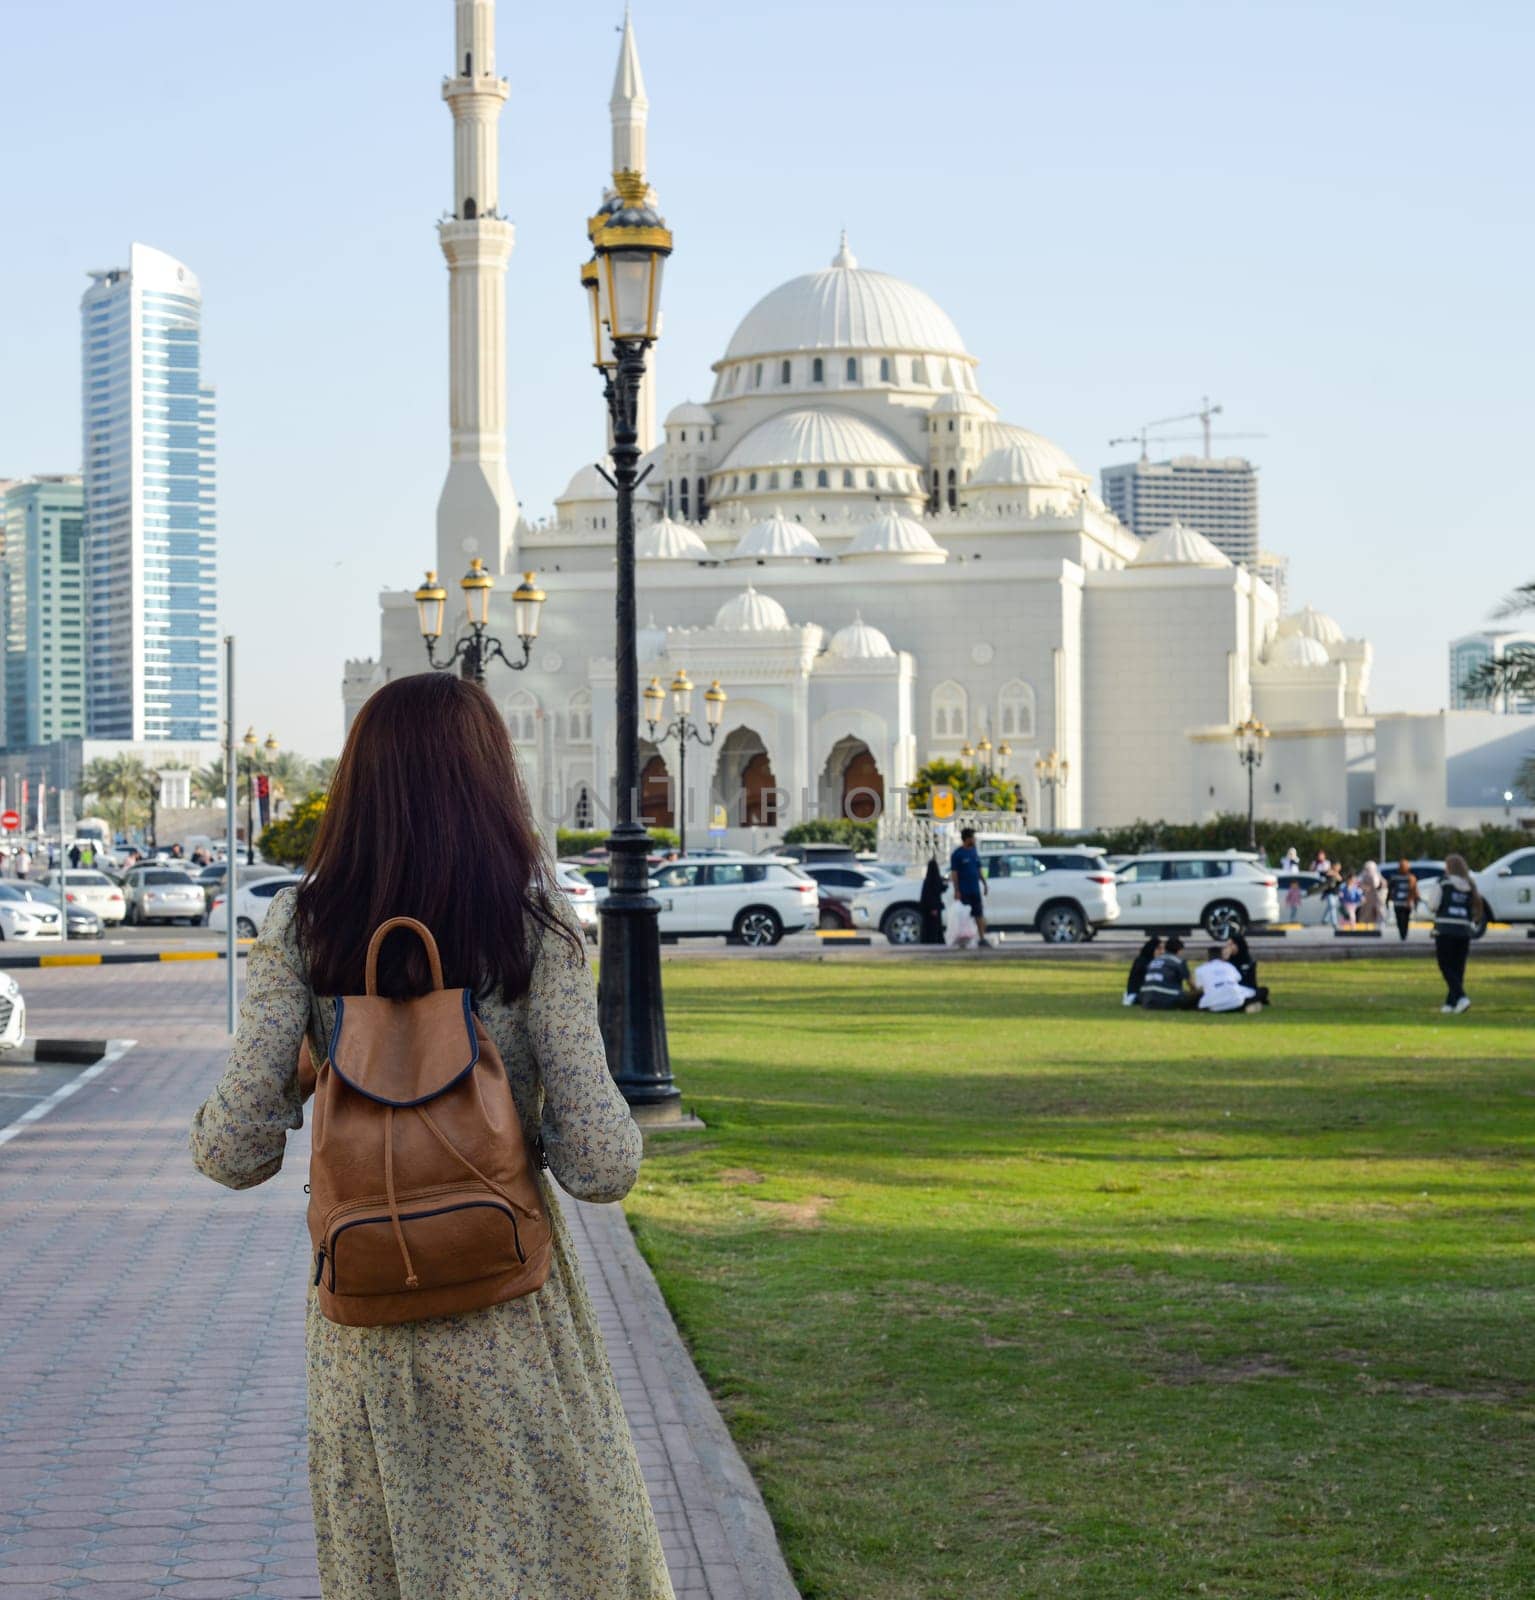 A woman in a long dress with a backpack walks along the Al Majaz embankment, Lake Khaled, Sharjah emirate. Rear view of a woman walking in the park. by Ekaterina34